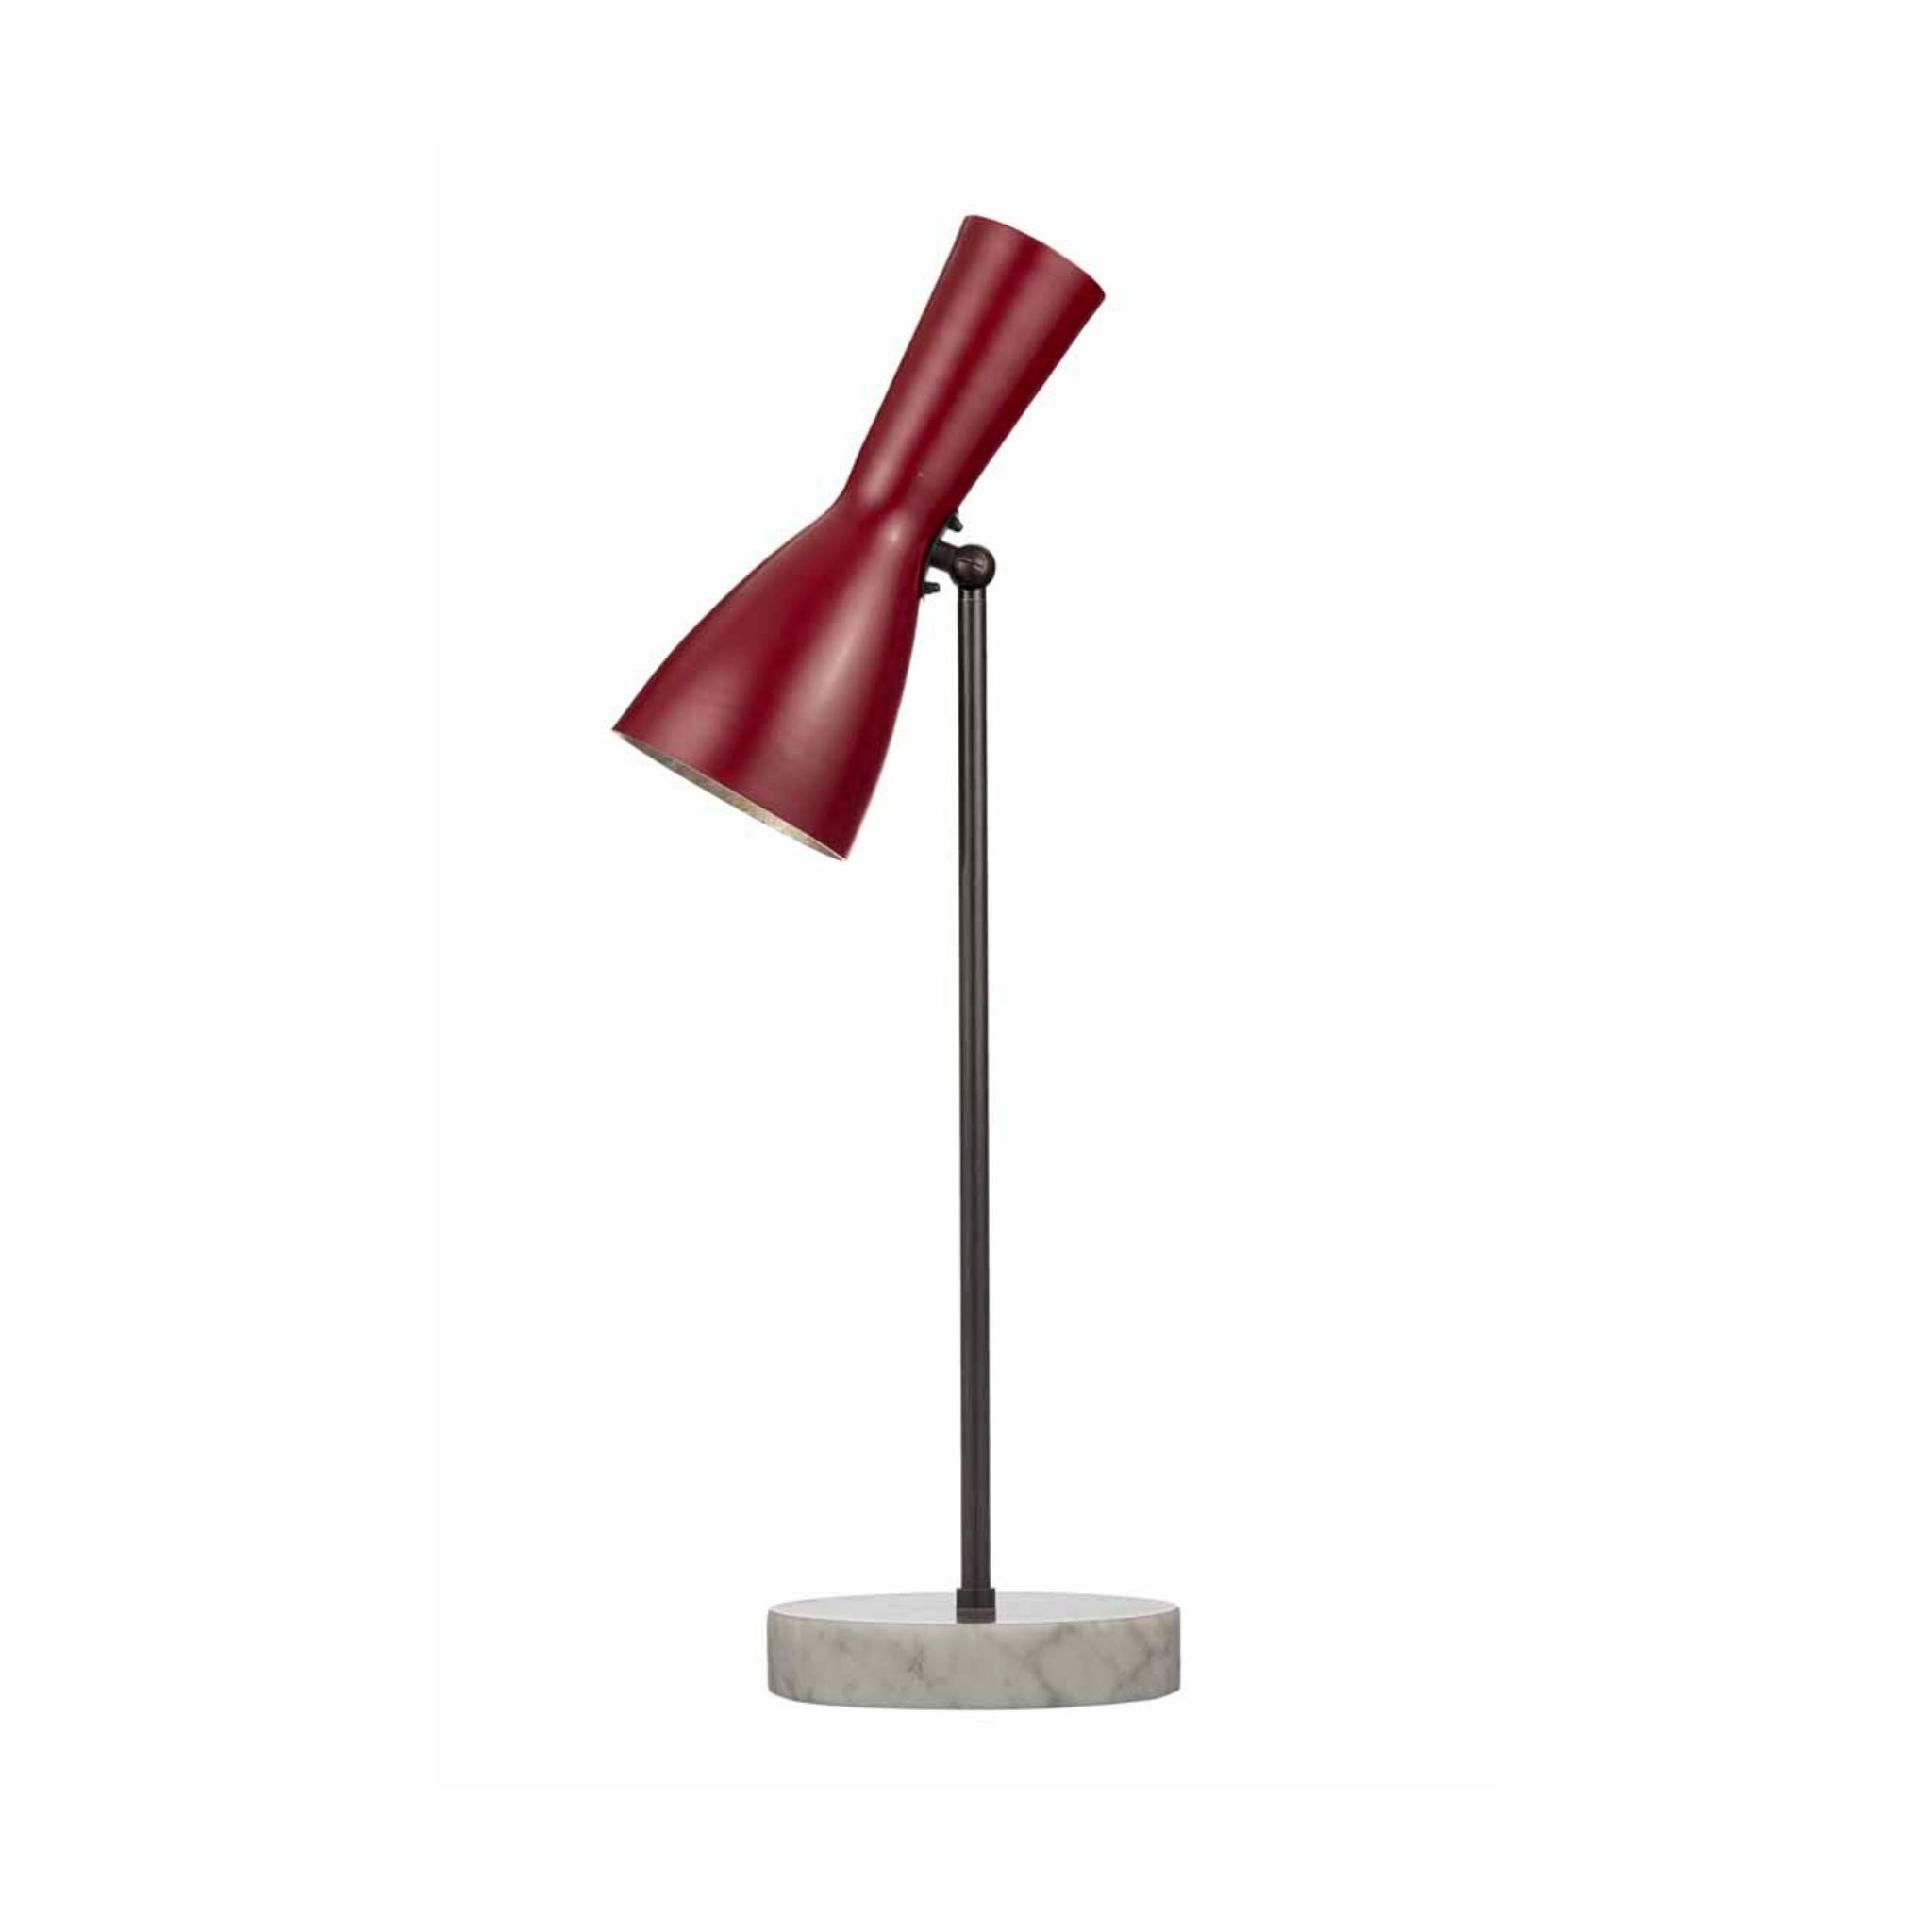 Wormhole wine red brass table lamp - ilbronzetto